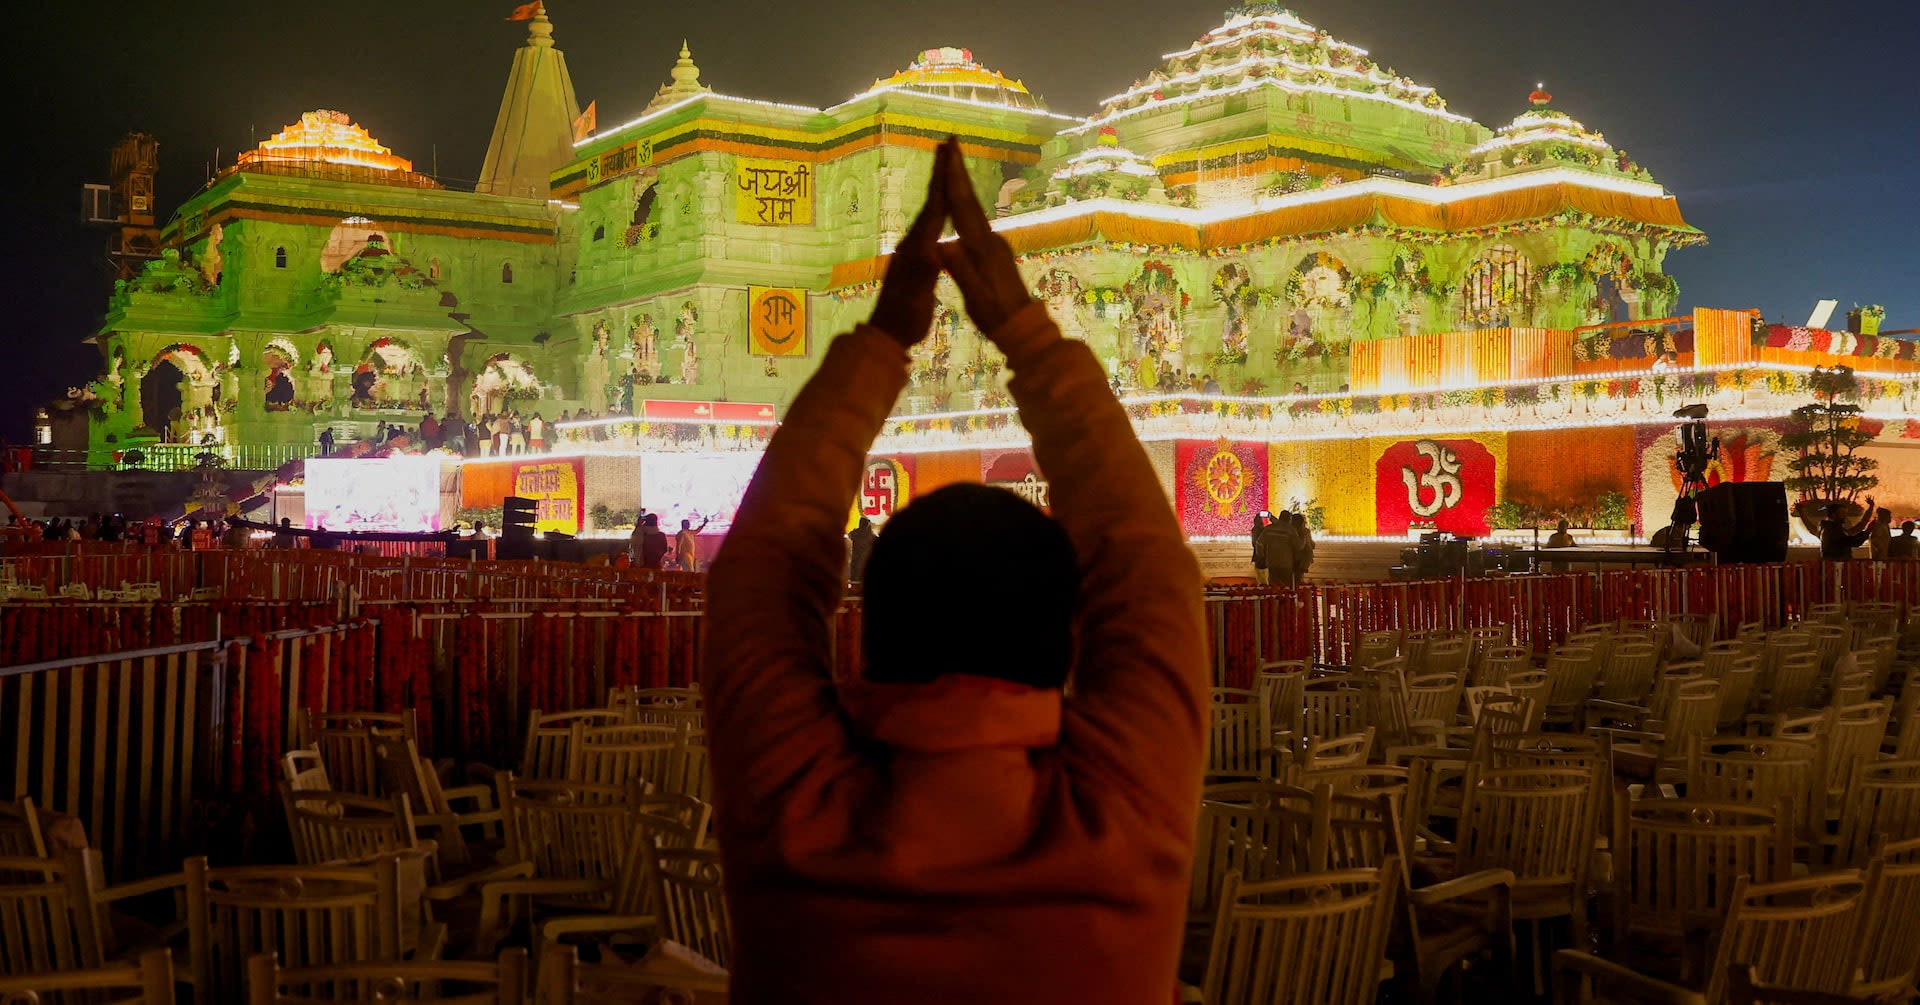 India's BJP concedes defeat in Ayodhya, where Modi opened grand Ram temple